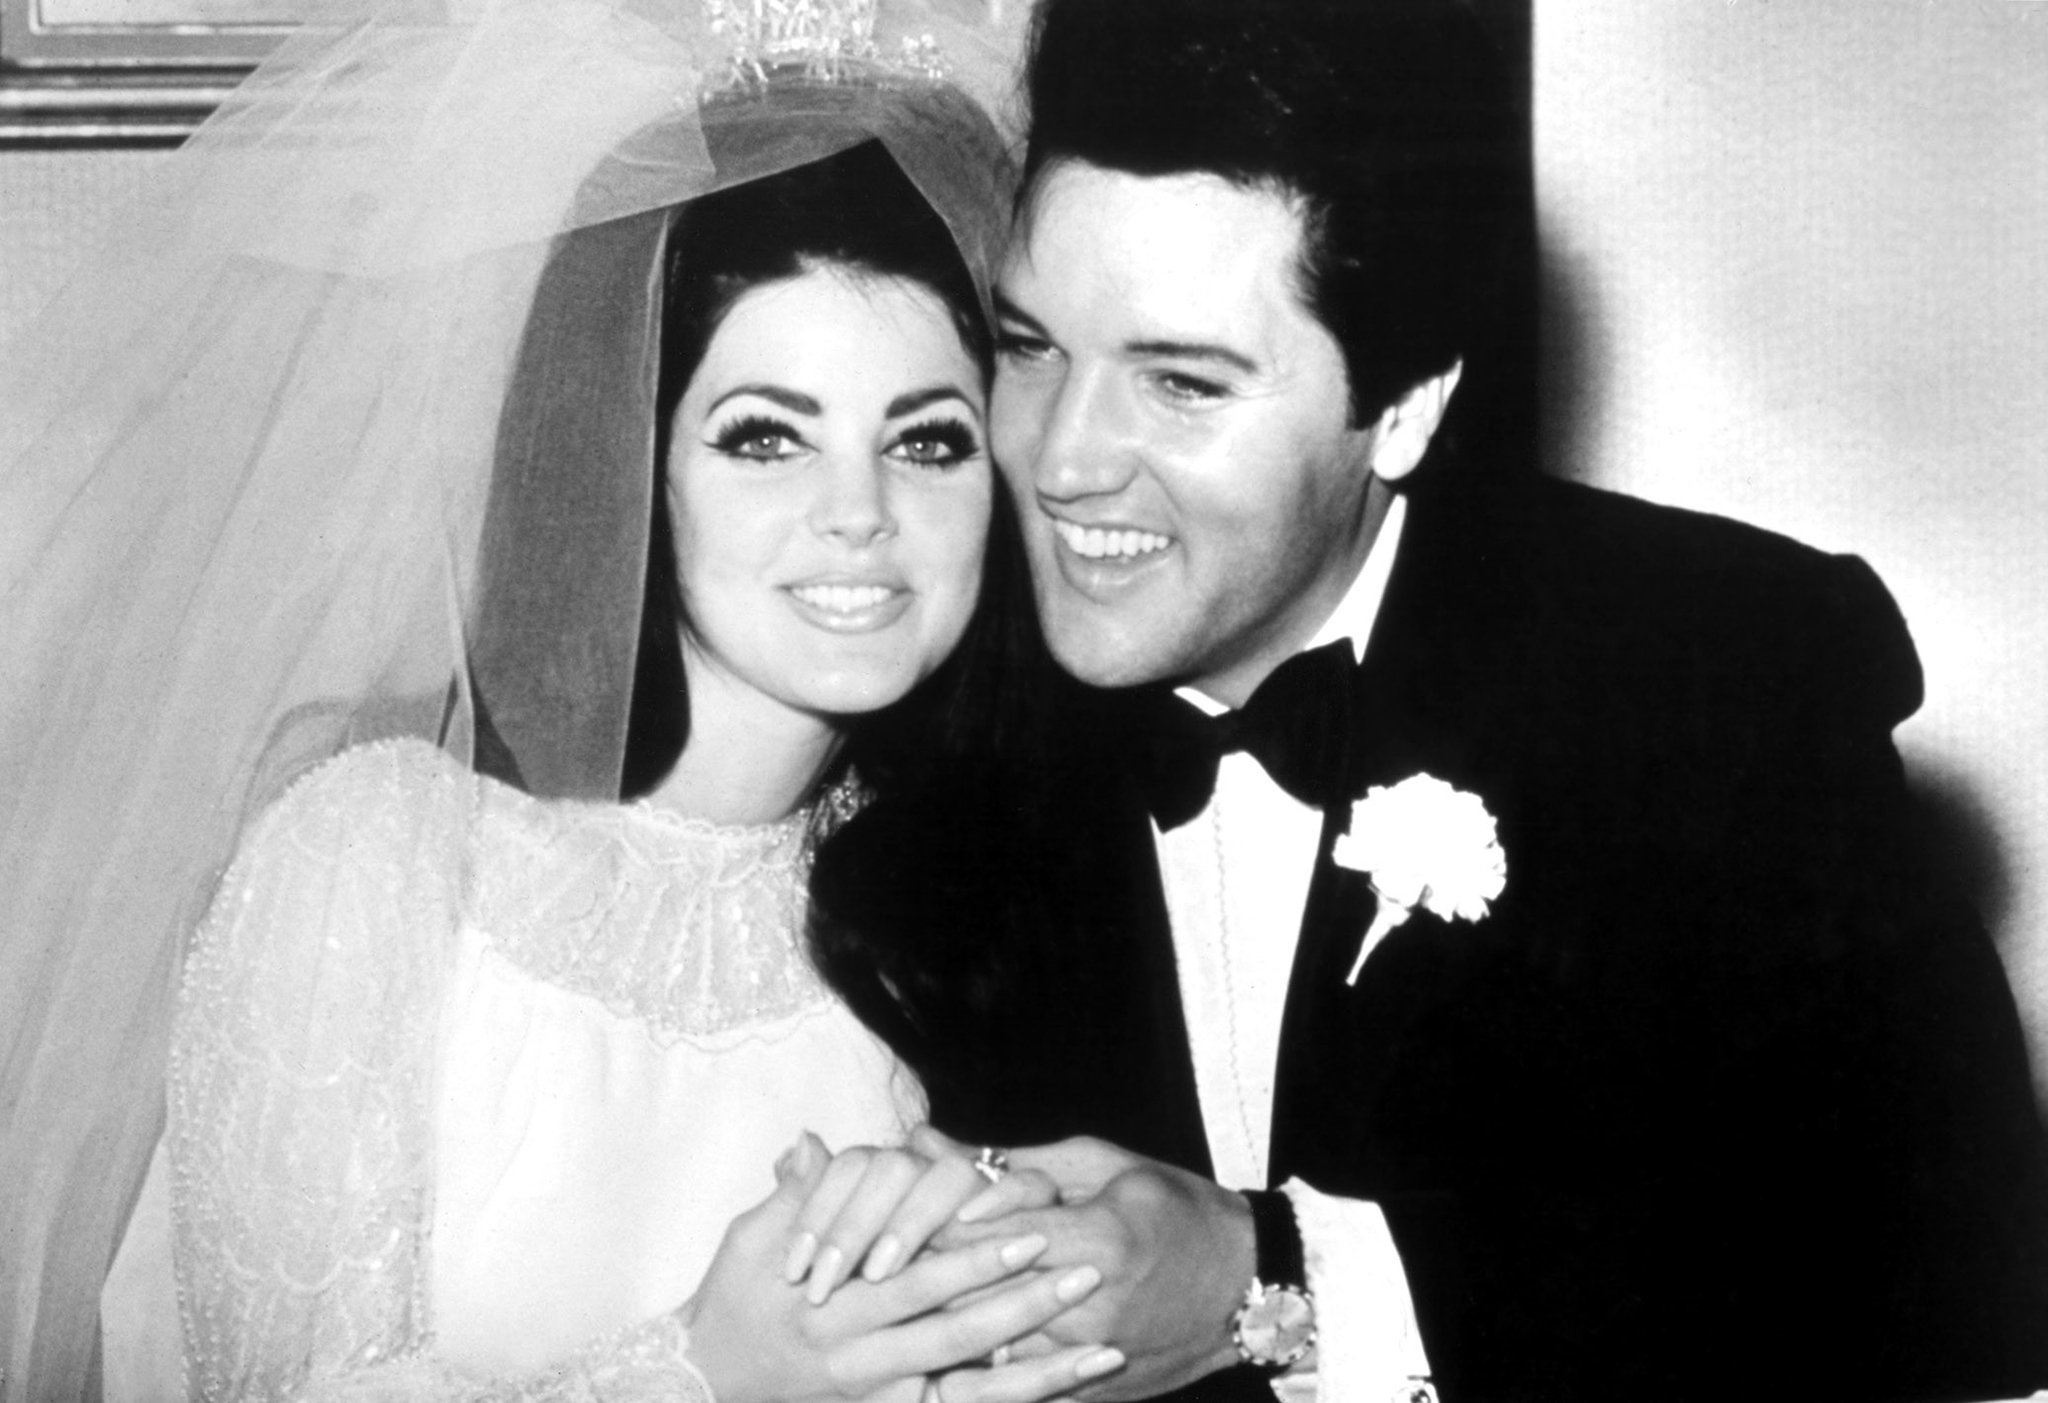 Priscilla and Elvis Presley after the marriage ceremony on May 1, 1967, in Las Vegas. | Source: Flickr/gdominick35